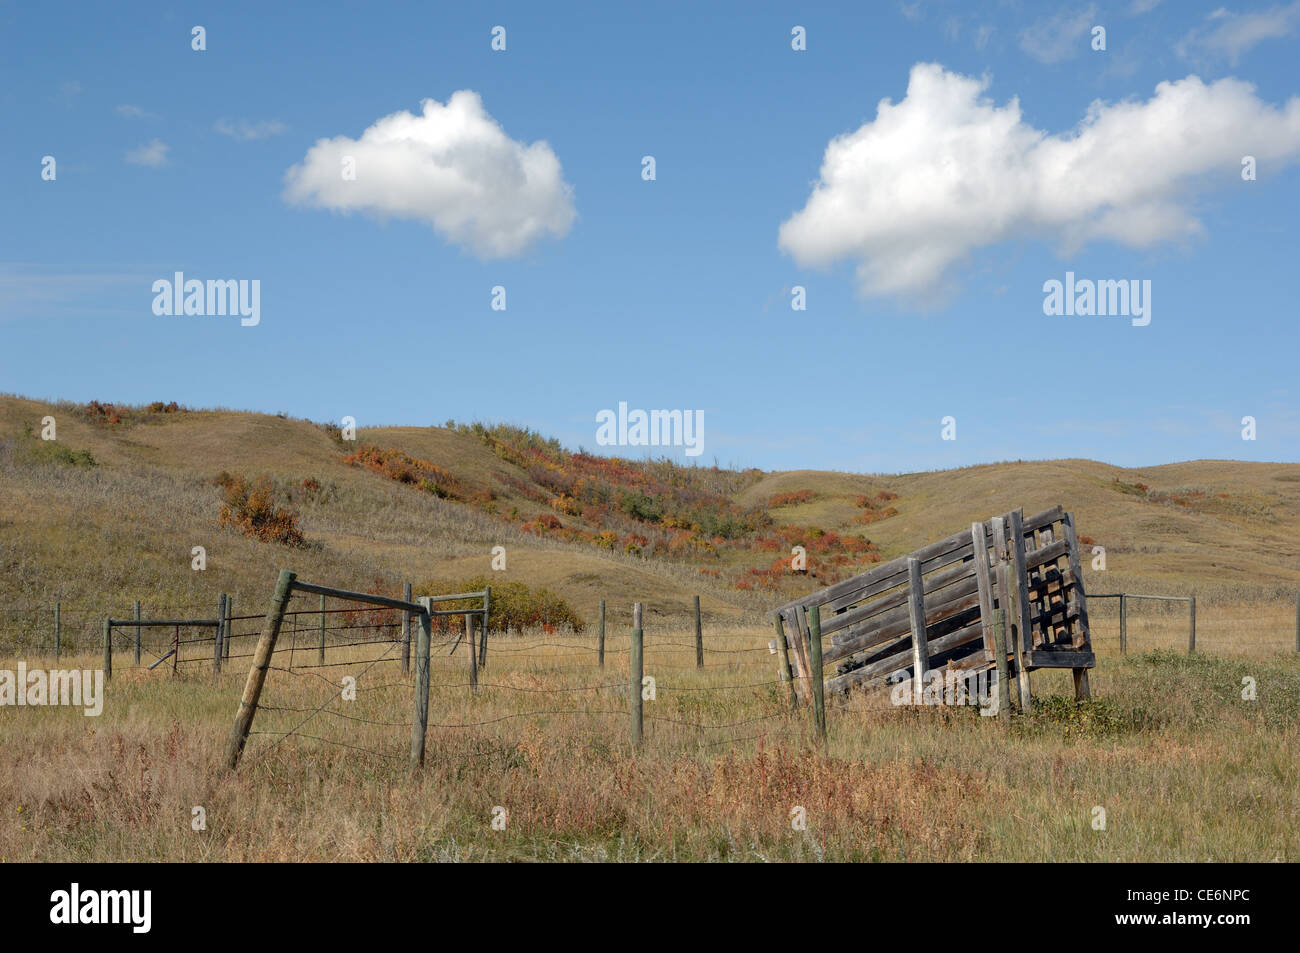 An old wooden cattle loading ramp and fence located in a field. Stock Photo